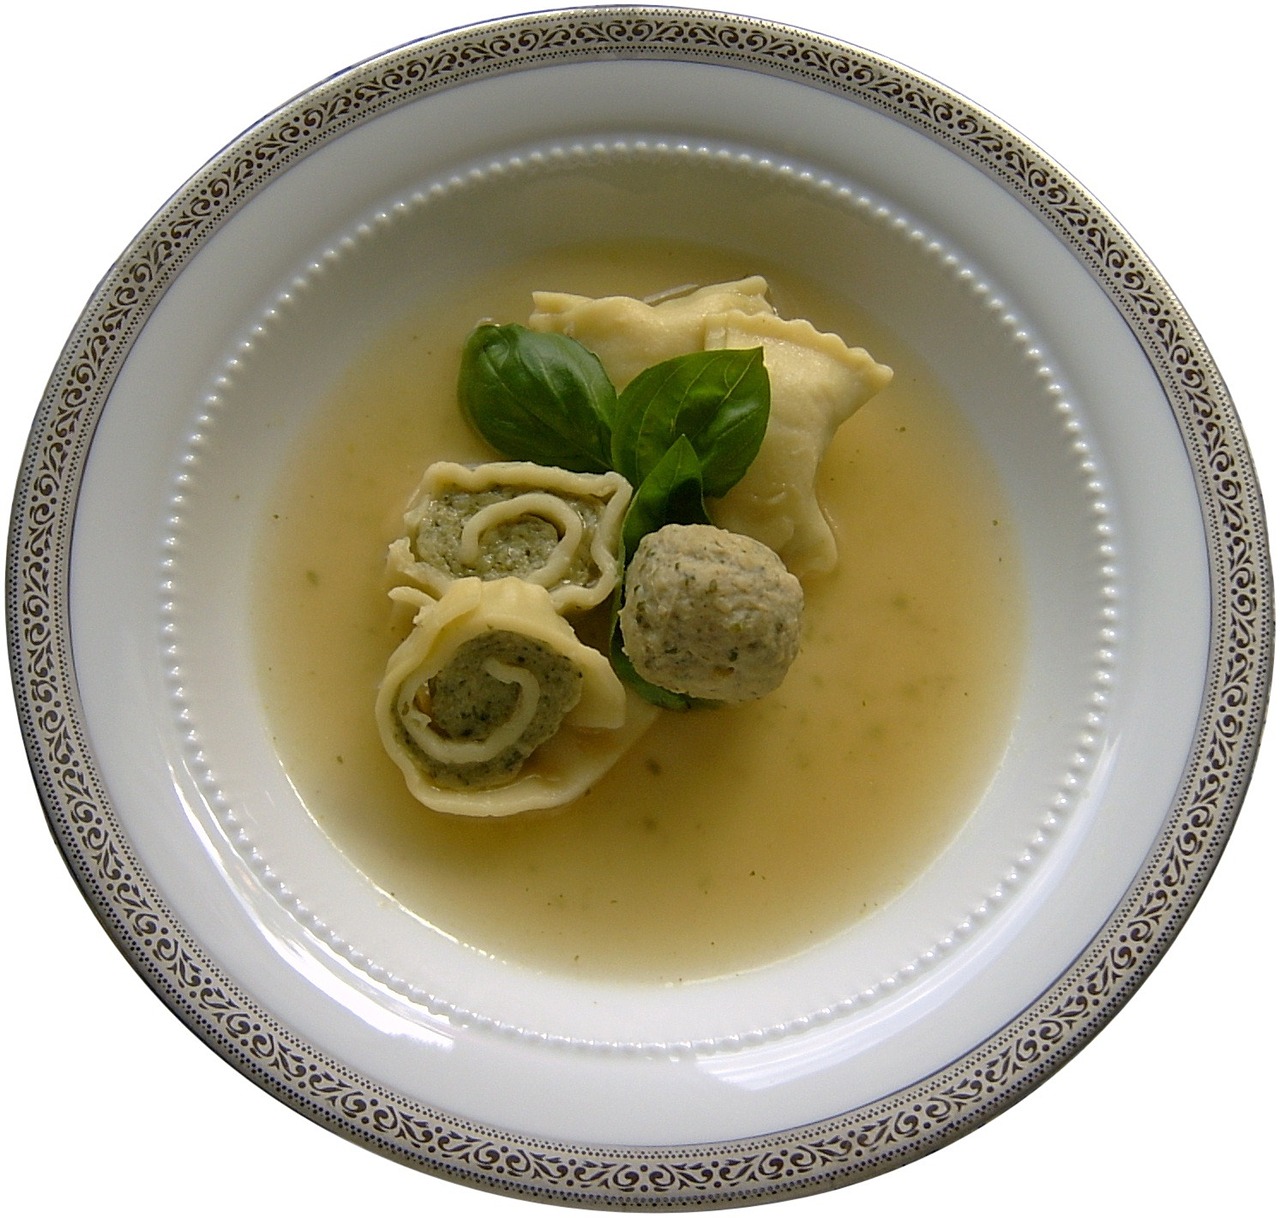 Polpette and Orzo in Broth